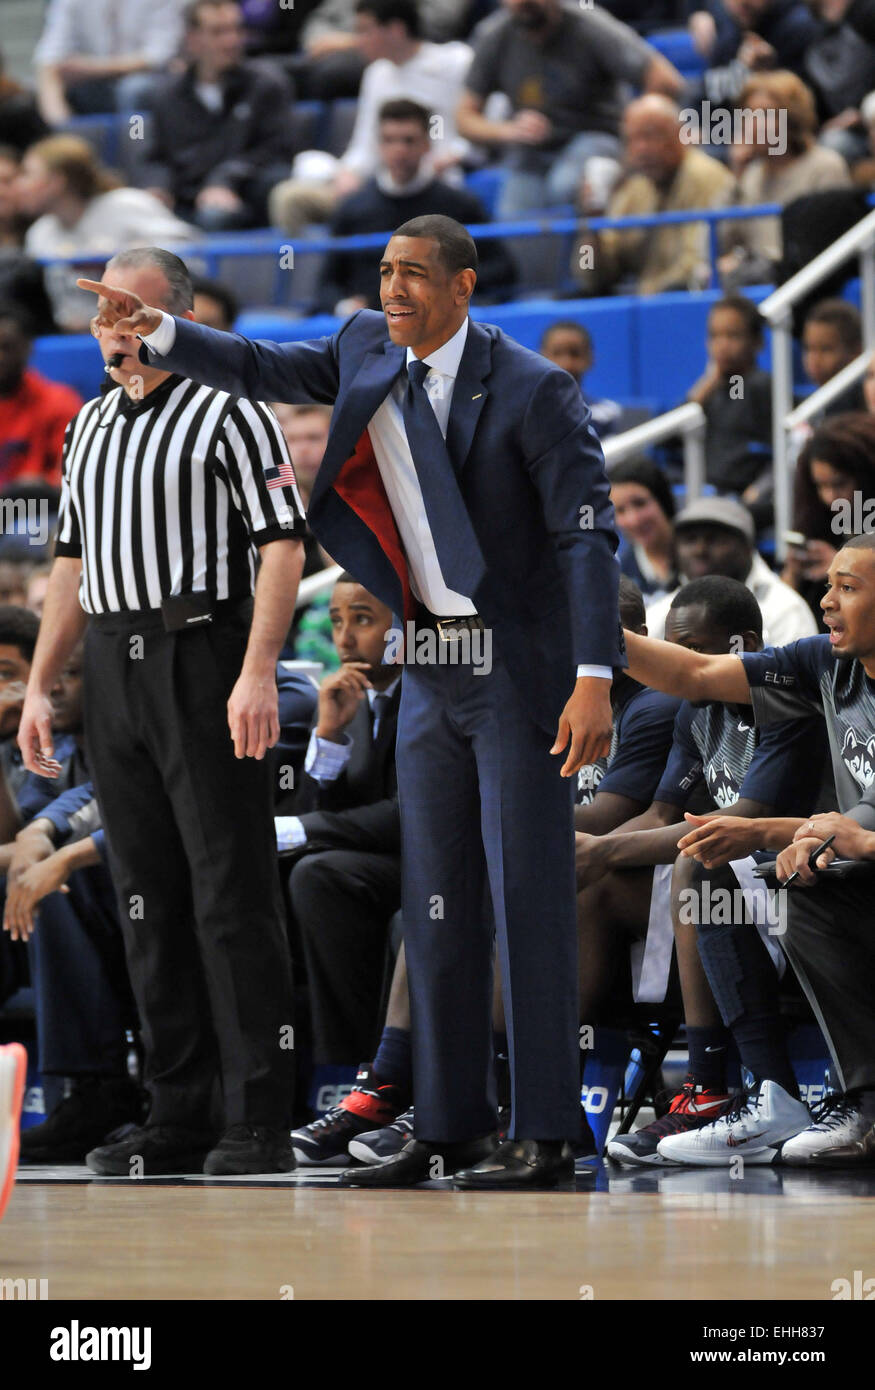 March 13th 2015: Head Coach Kevin Ollie of Uconn in action during the NCAA American Conference Tournament Basketball game between the Cincinnati Bearcats and the Connecticut Huskies at The XL Center in Hartford, CT. Gregory Vasil/CSM Stock Photo